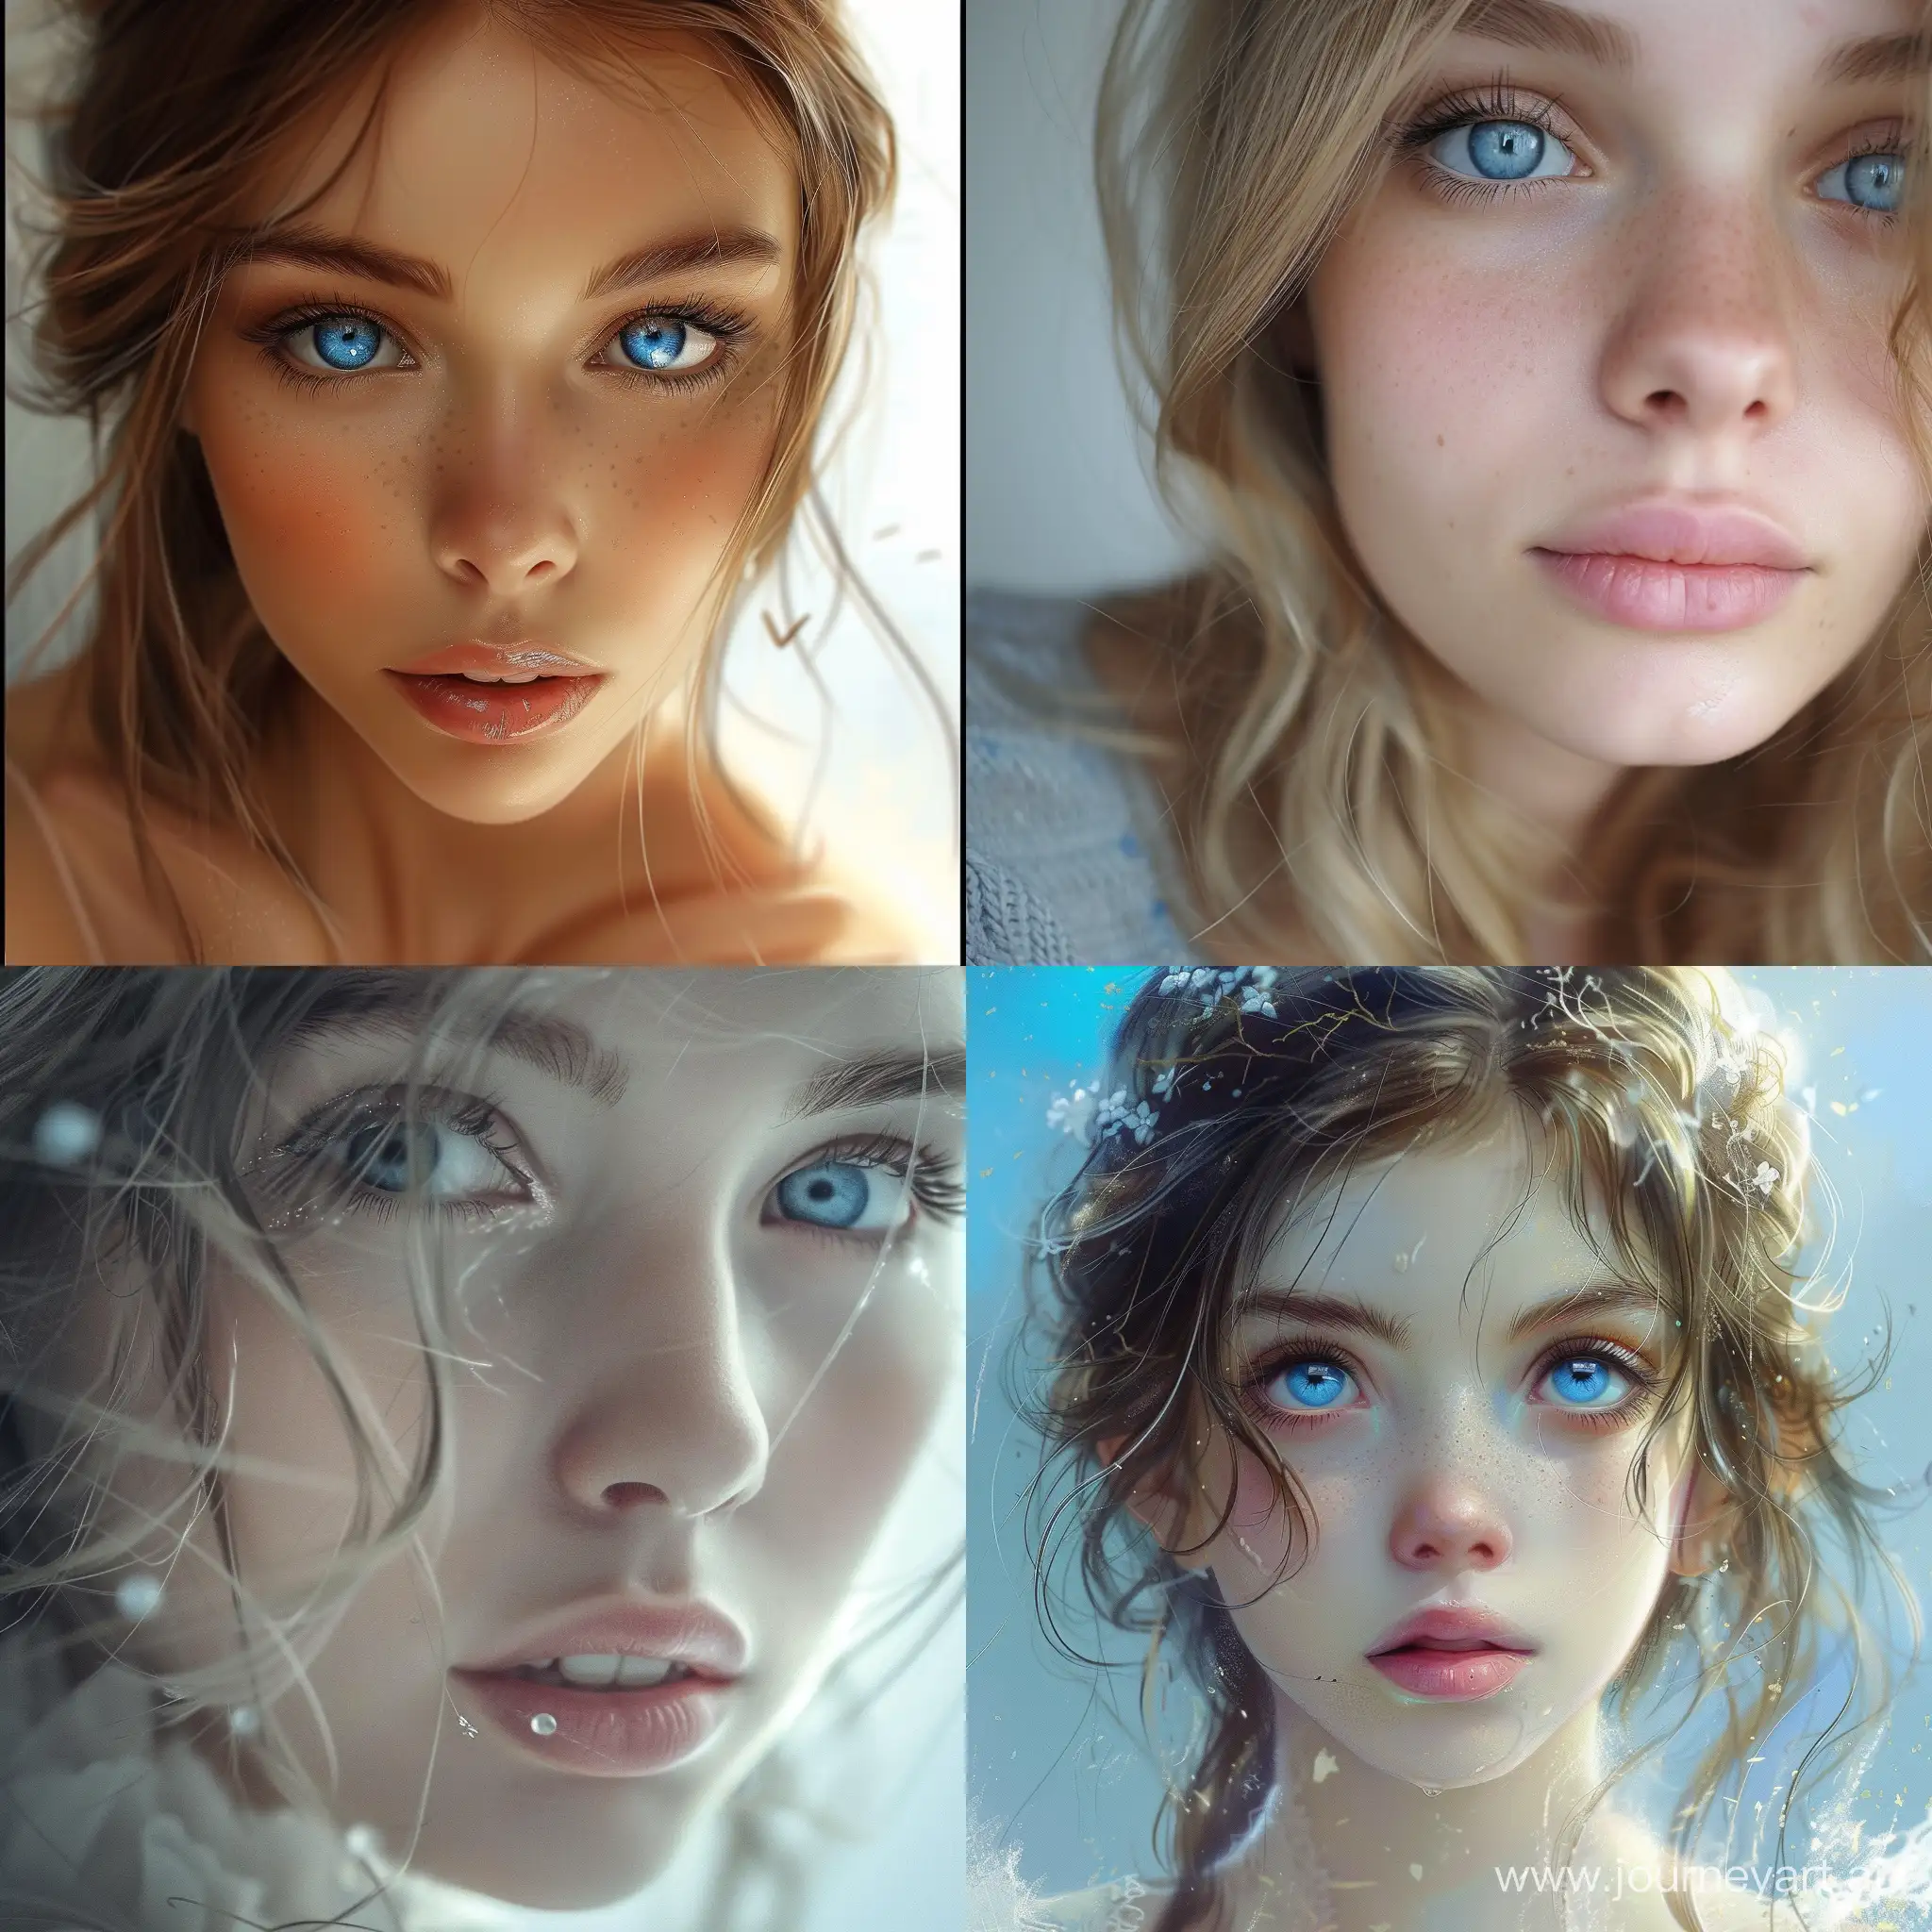 A beautiful girl. With blue eyes.